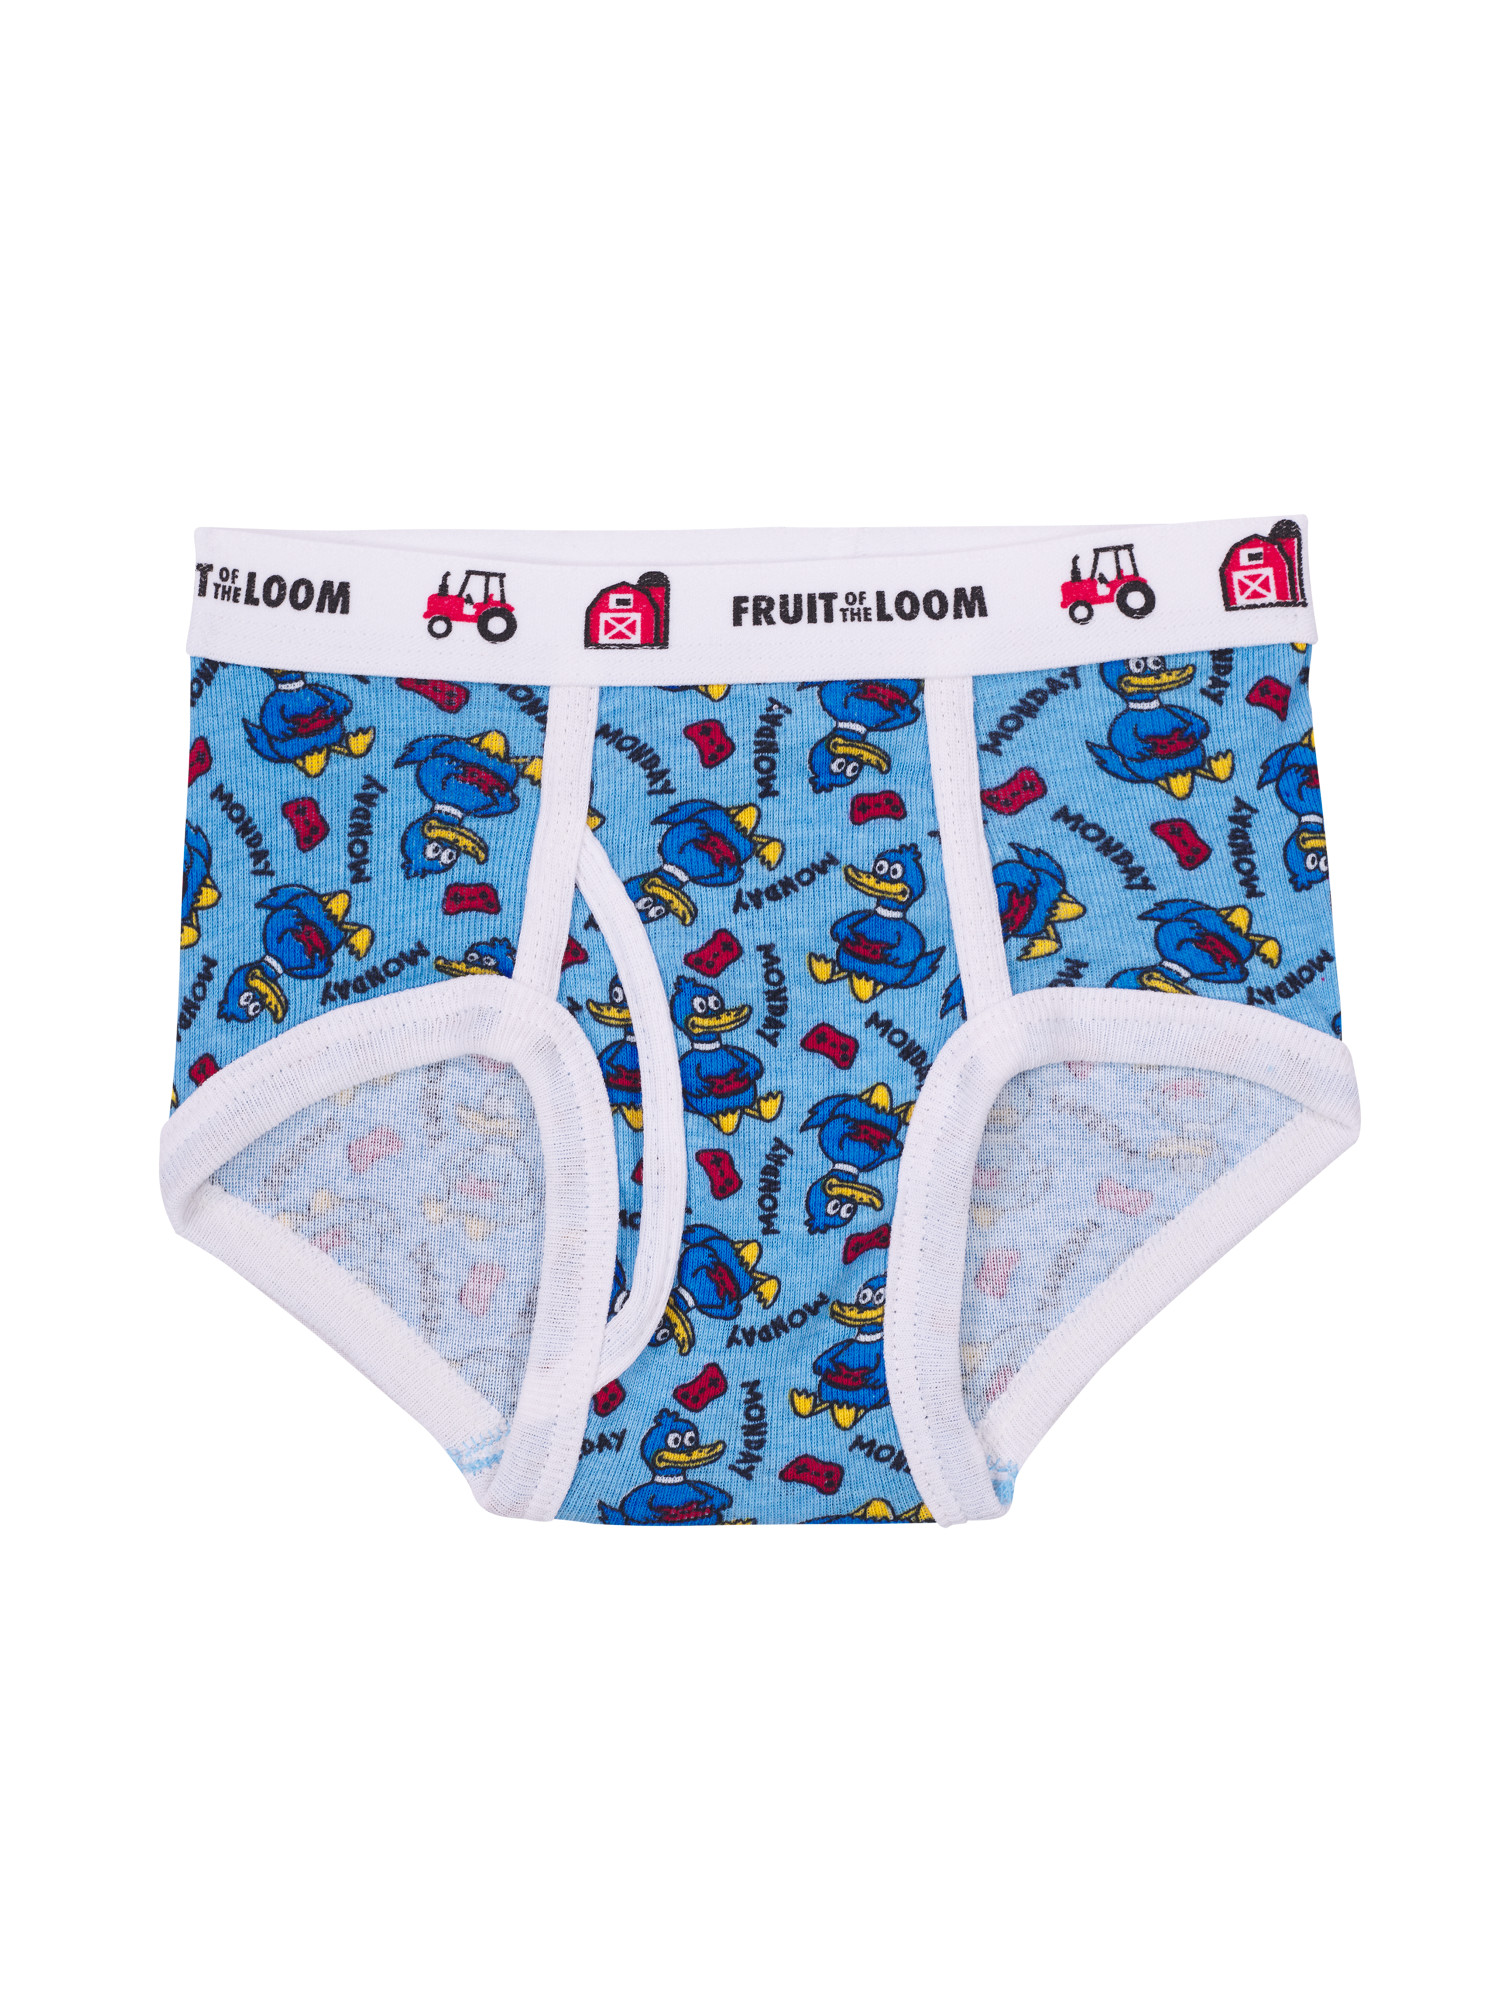 Fruit of the Loom Toddler Boy Cotton Briefs, 7 Pack - image 4 of 11